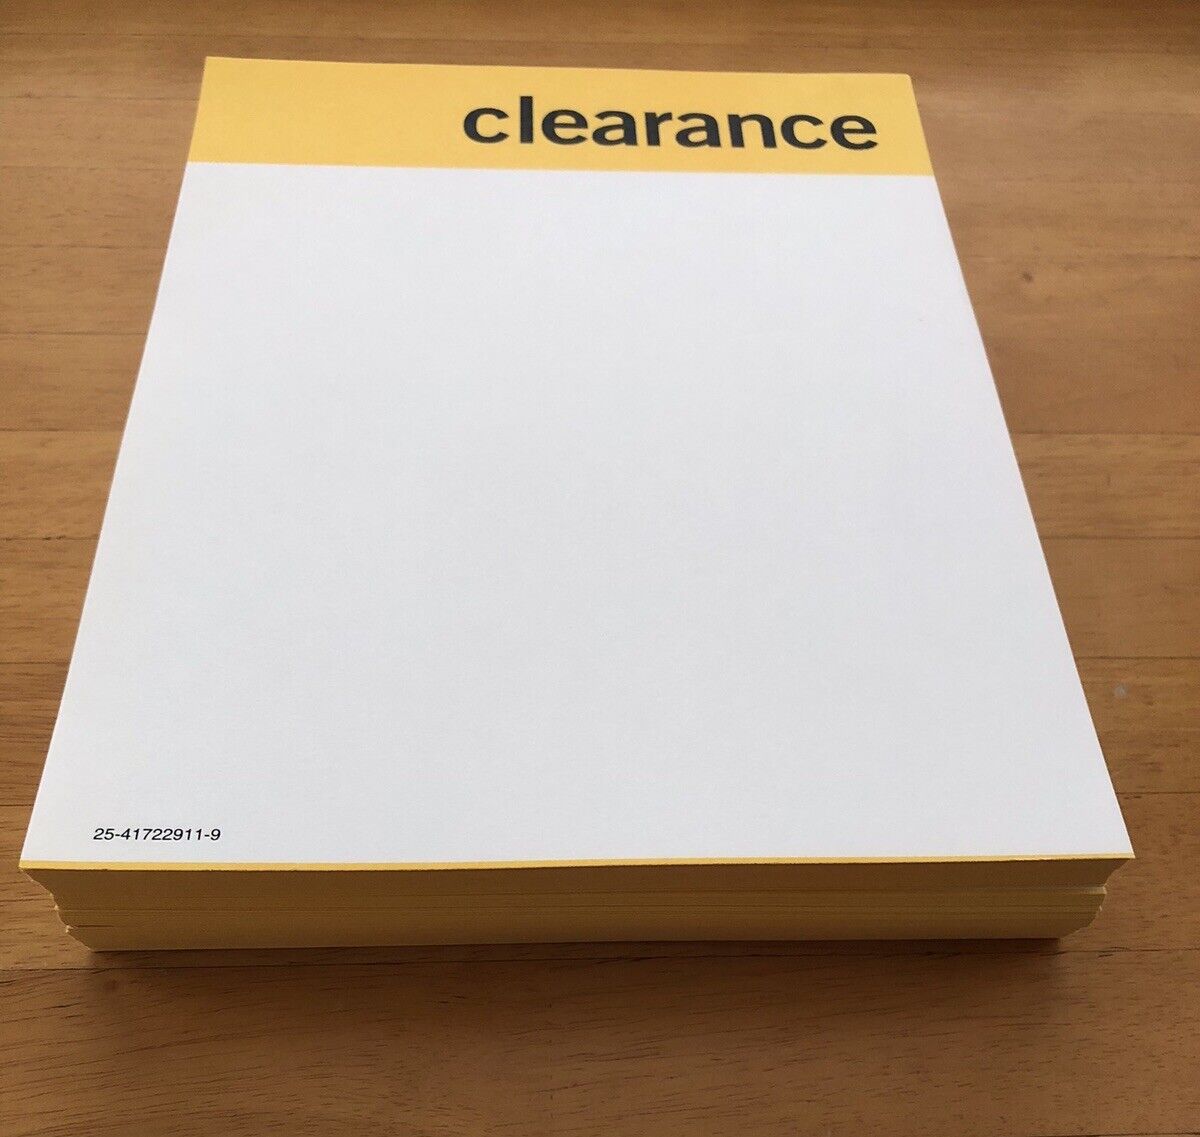 Kmart Clearance 8.5” By 11” Paper Sign Vintage Retail - Huge Lot Of 80+- New